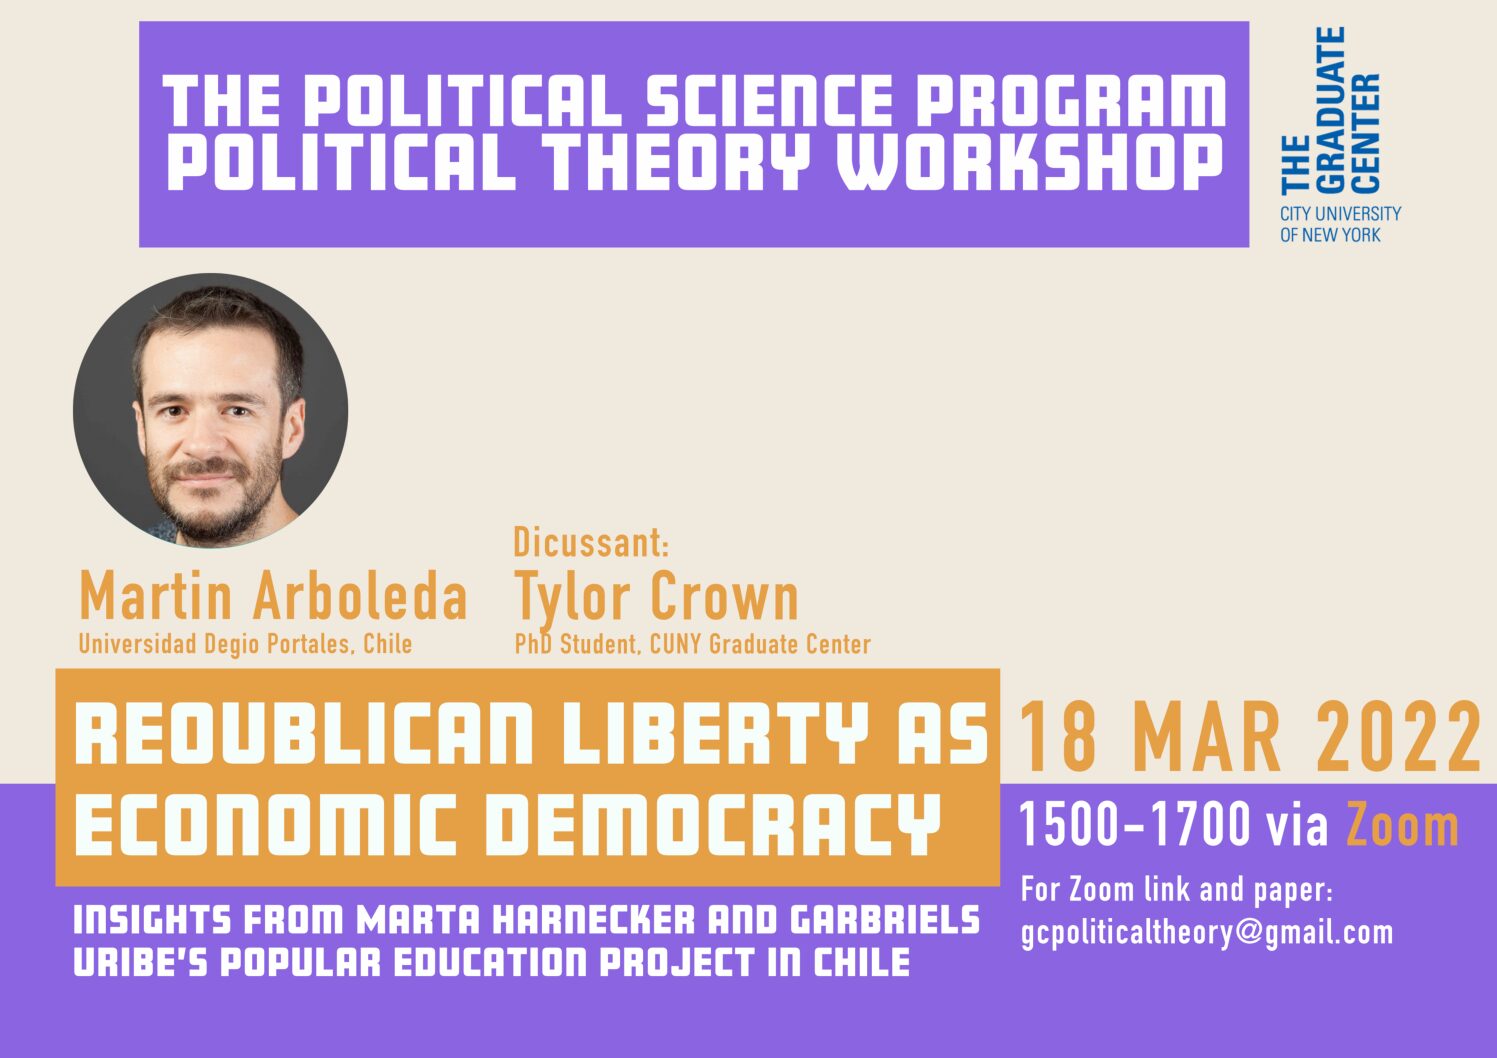 Political Theory Workshop: Martín Arboleda, "Republican Liberty as Economic Democracy: Insights from Marta Harnecker and Gabriela Uribe’s Popular Education Project in Chile," Friday, March 18, 3-5pm